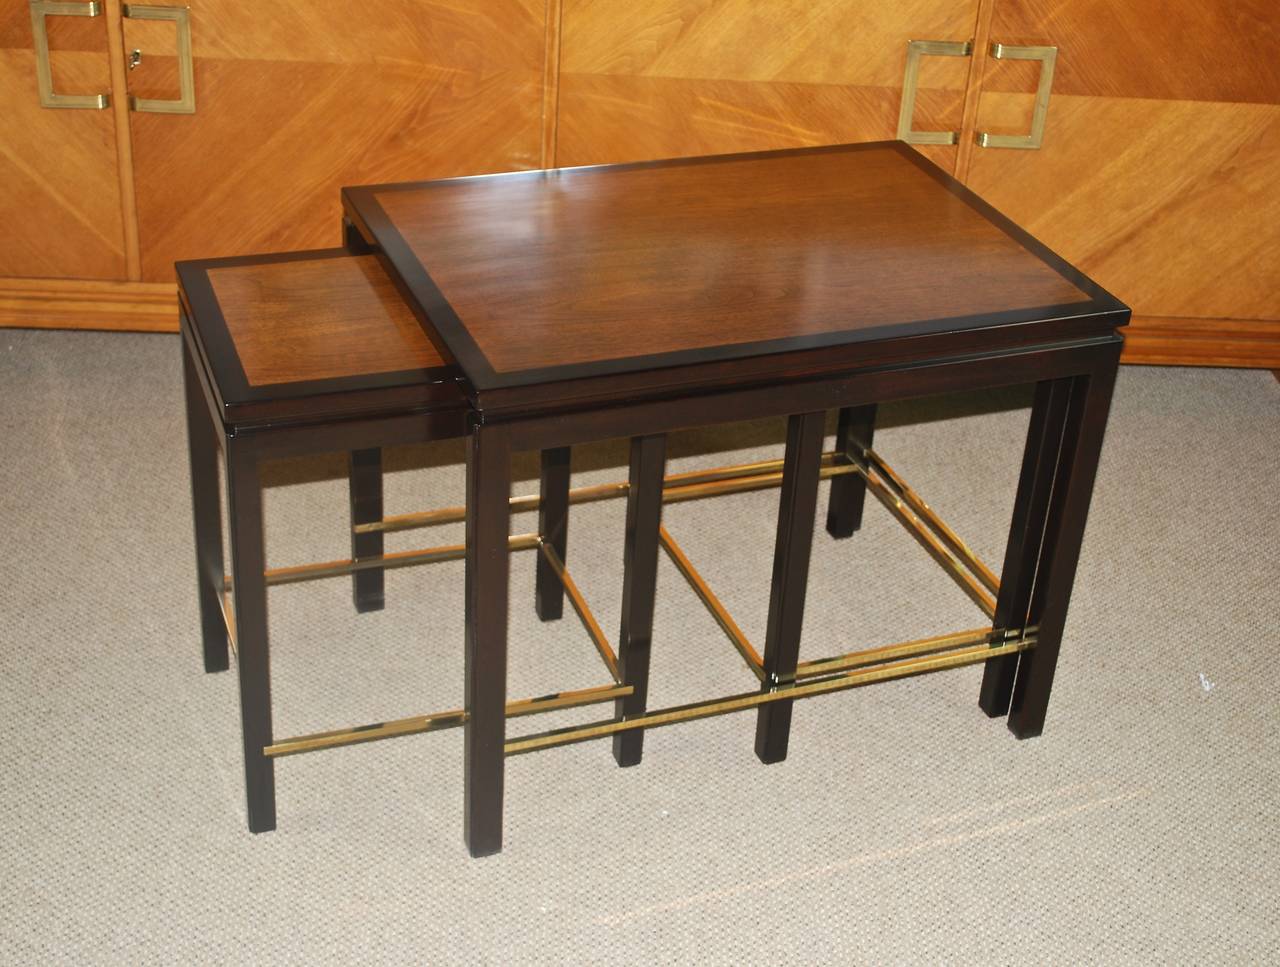 Newly refinished set of two-tone nesting tables by Edward Wormley for Dunbar.
Light walnut tops, banded in contrasting borders, ebonized legs and brass stretchers. Beautiful grain on all three tops. Metal labels on all three tables.

Please